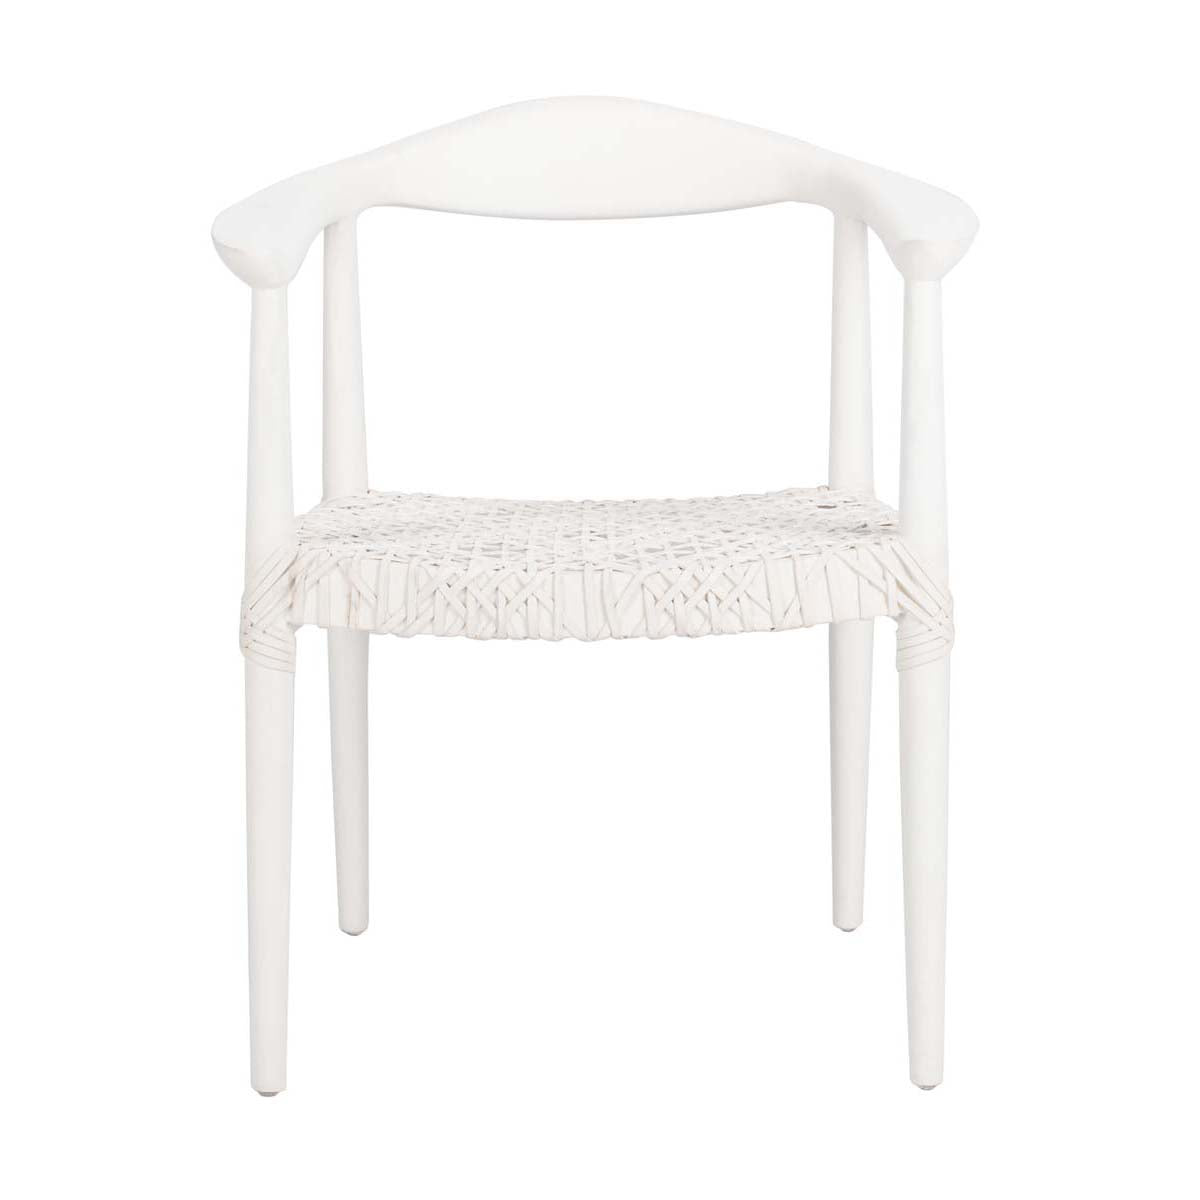 Safavieh Juneau Leather Woven Accent Chair , ACH1003 - White Mindi Wood/White Leather